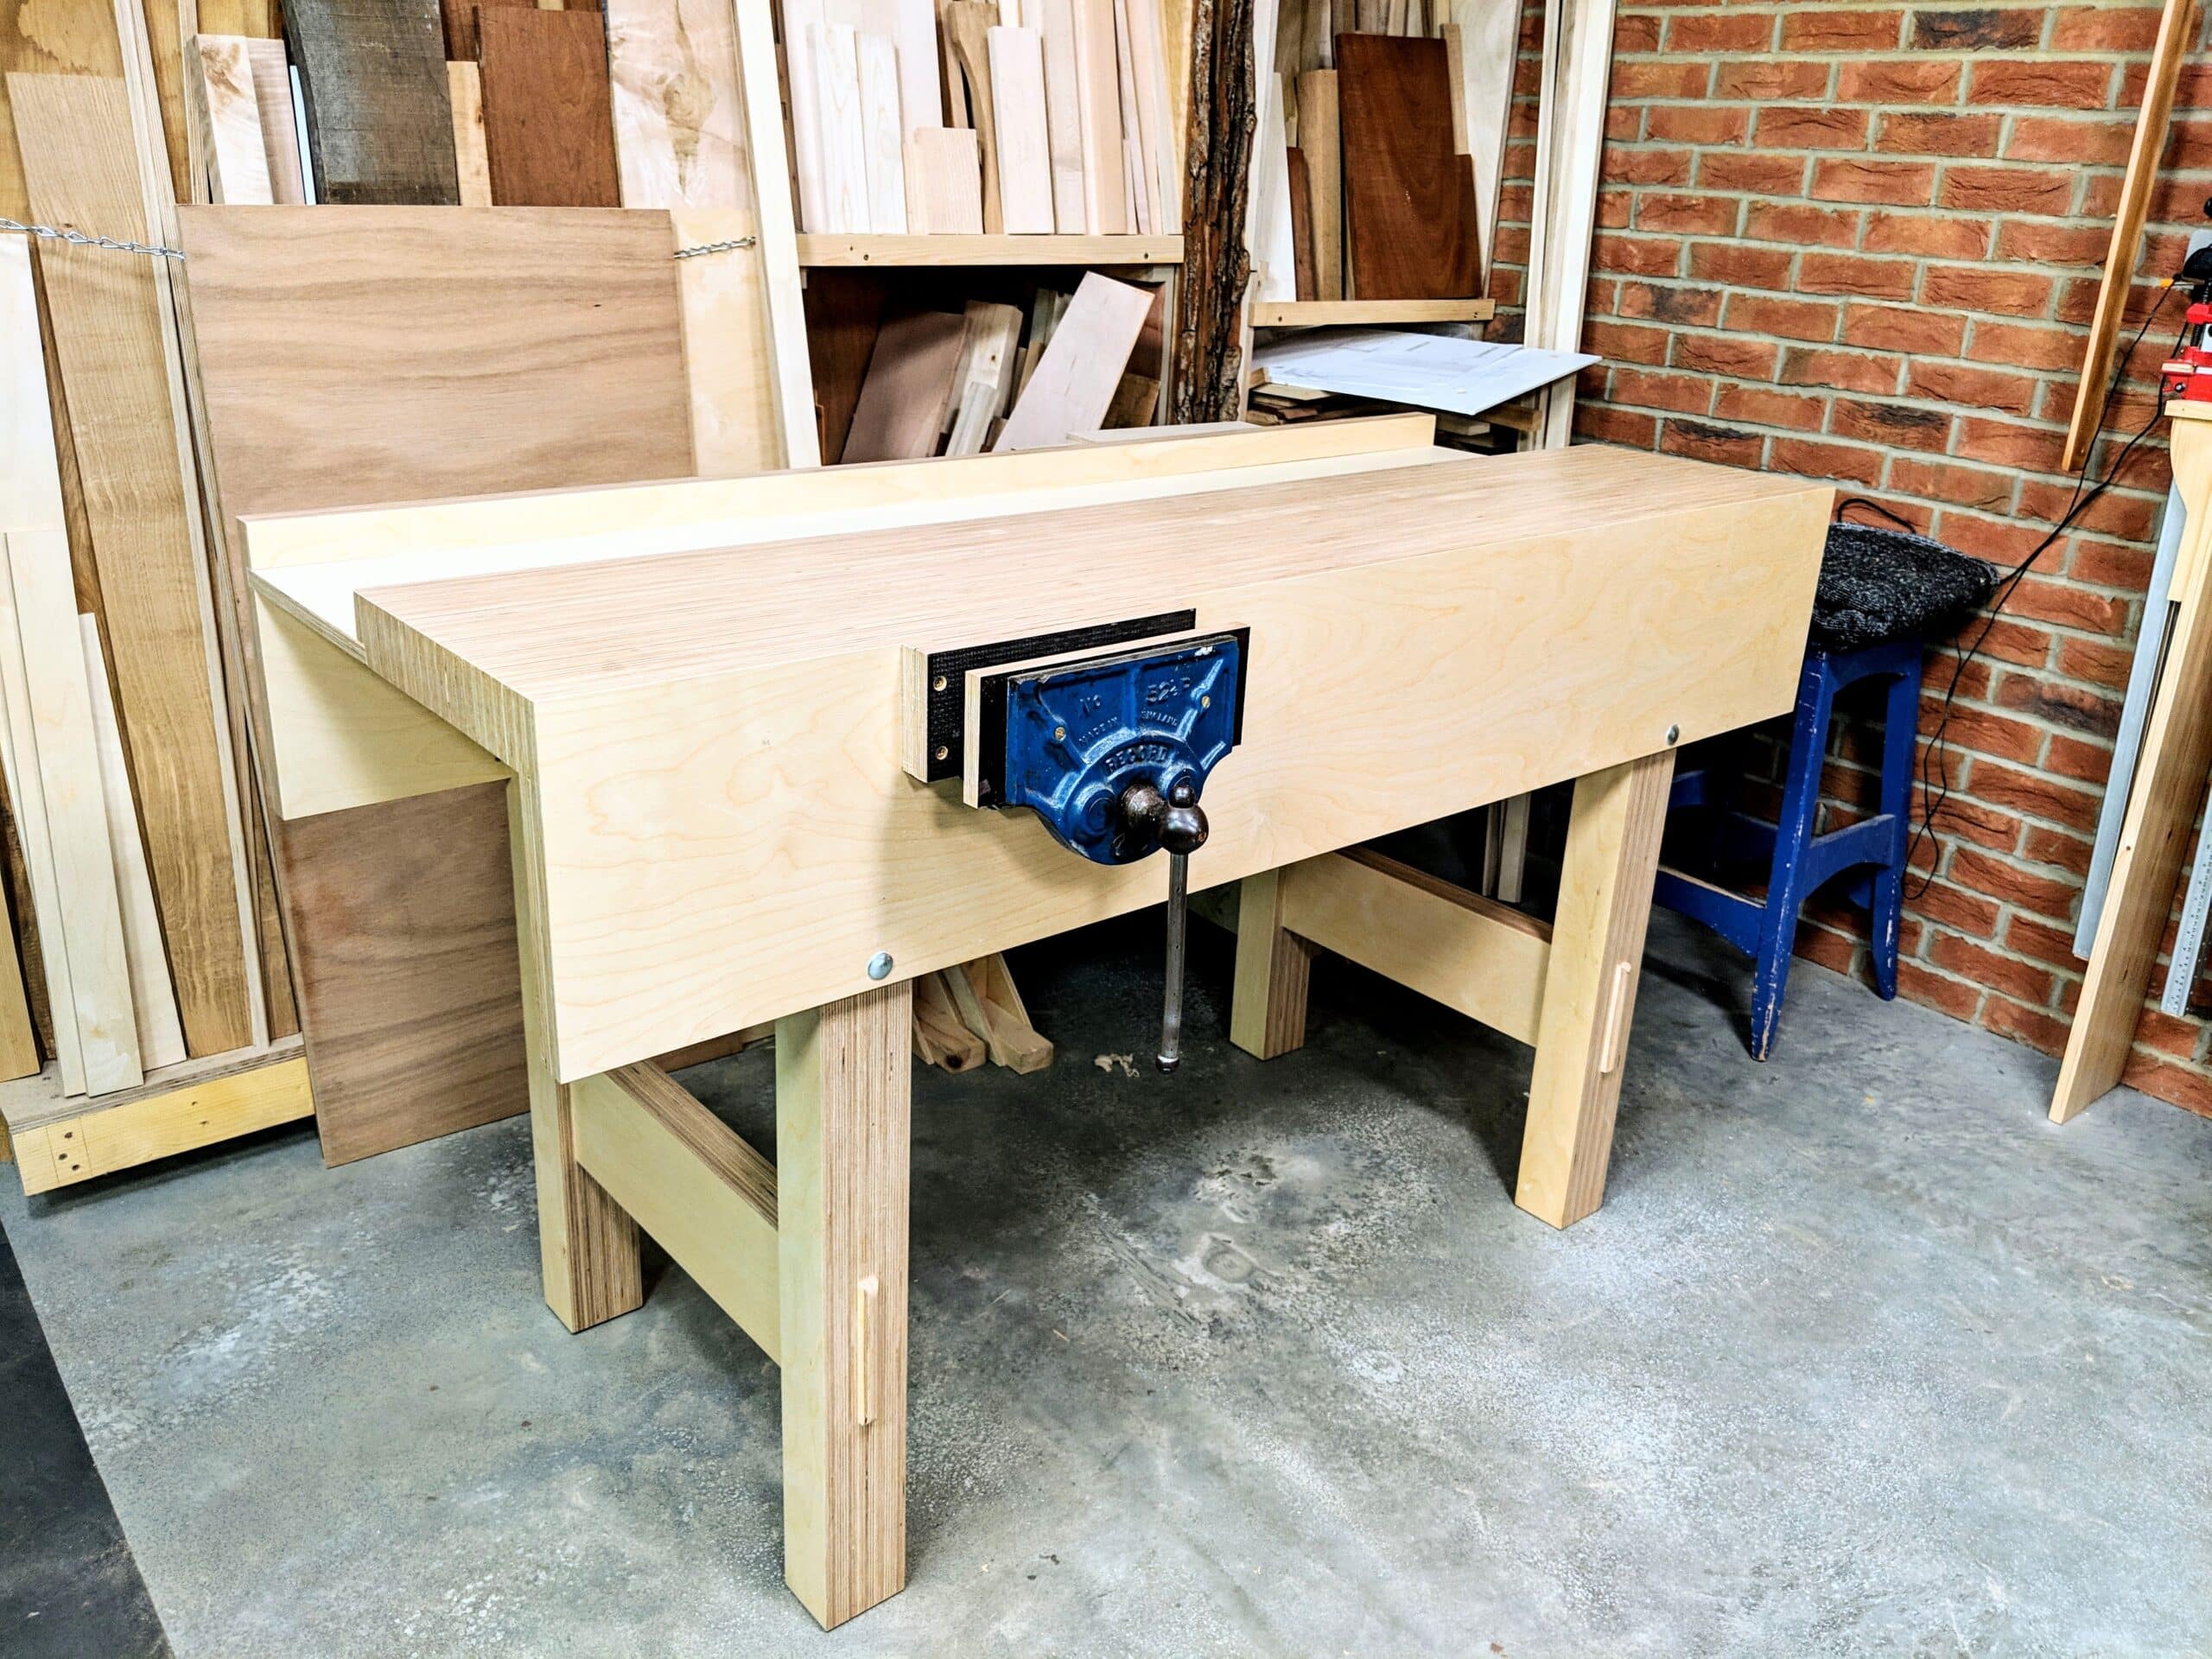 Three Fast Finishes - Woodworking, Blog, Videos, Plans